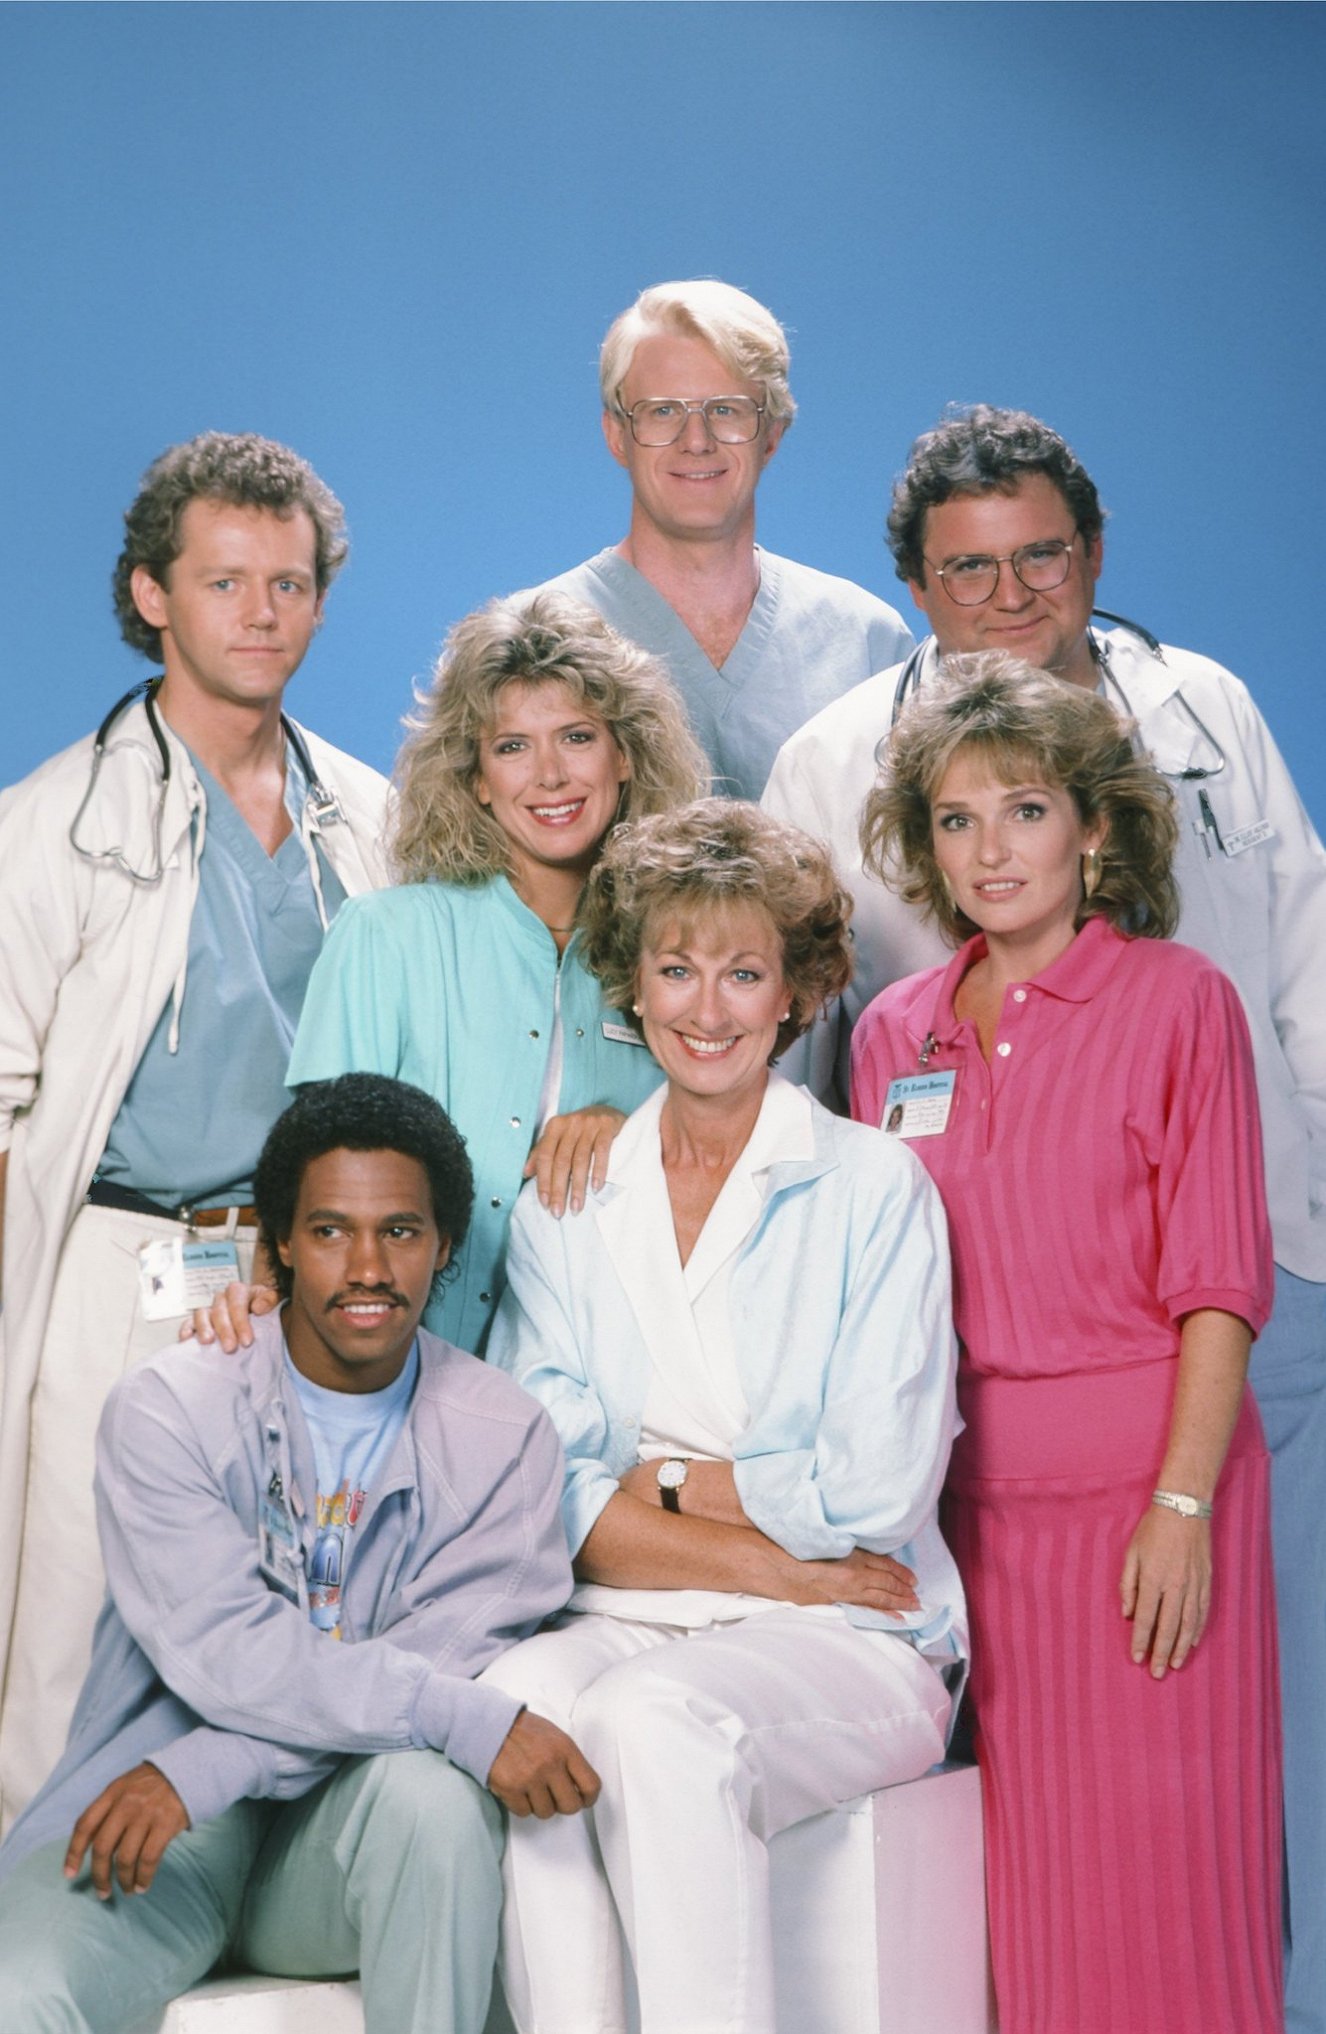 st elsewhere cast of characters